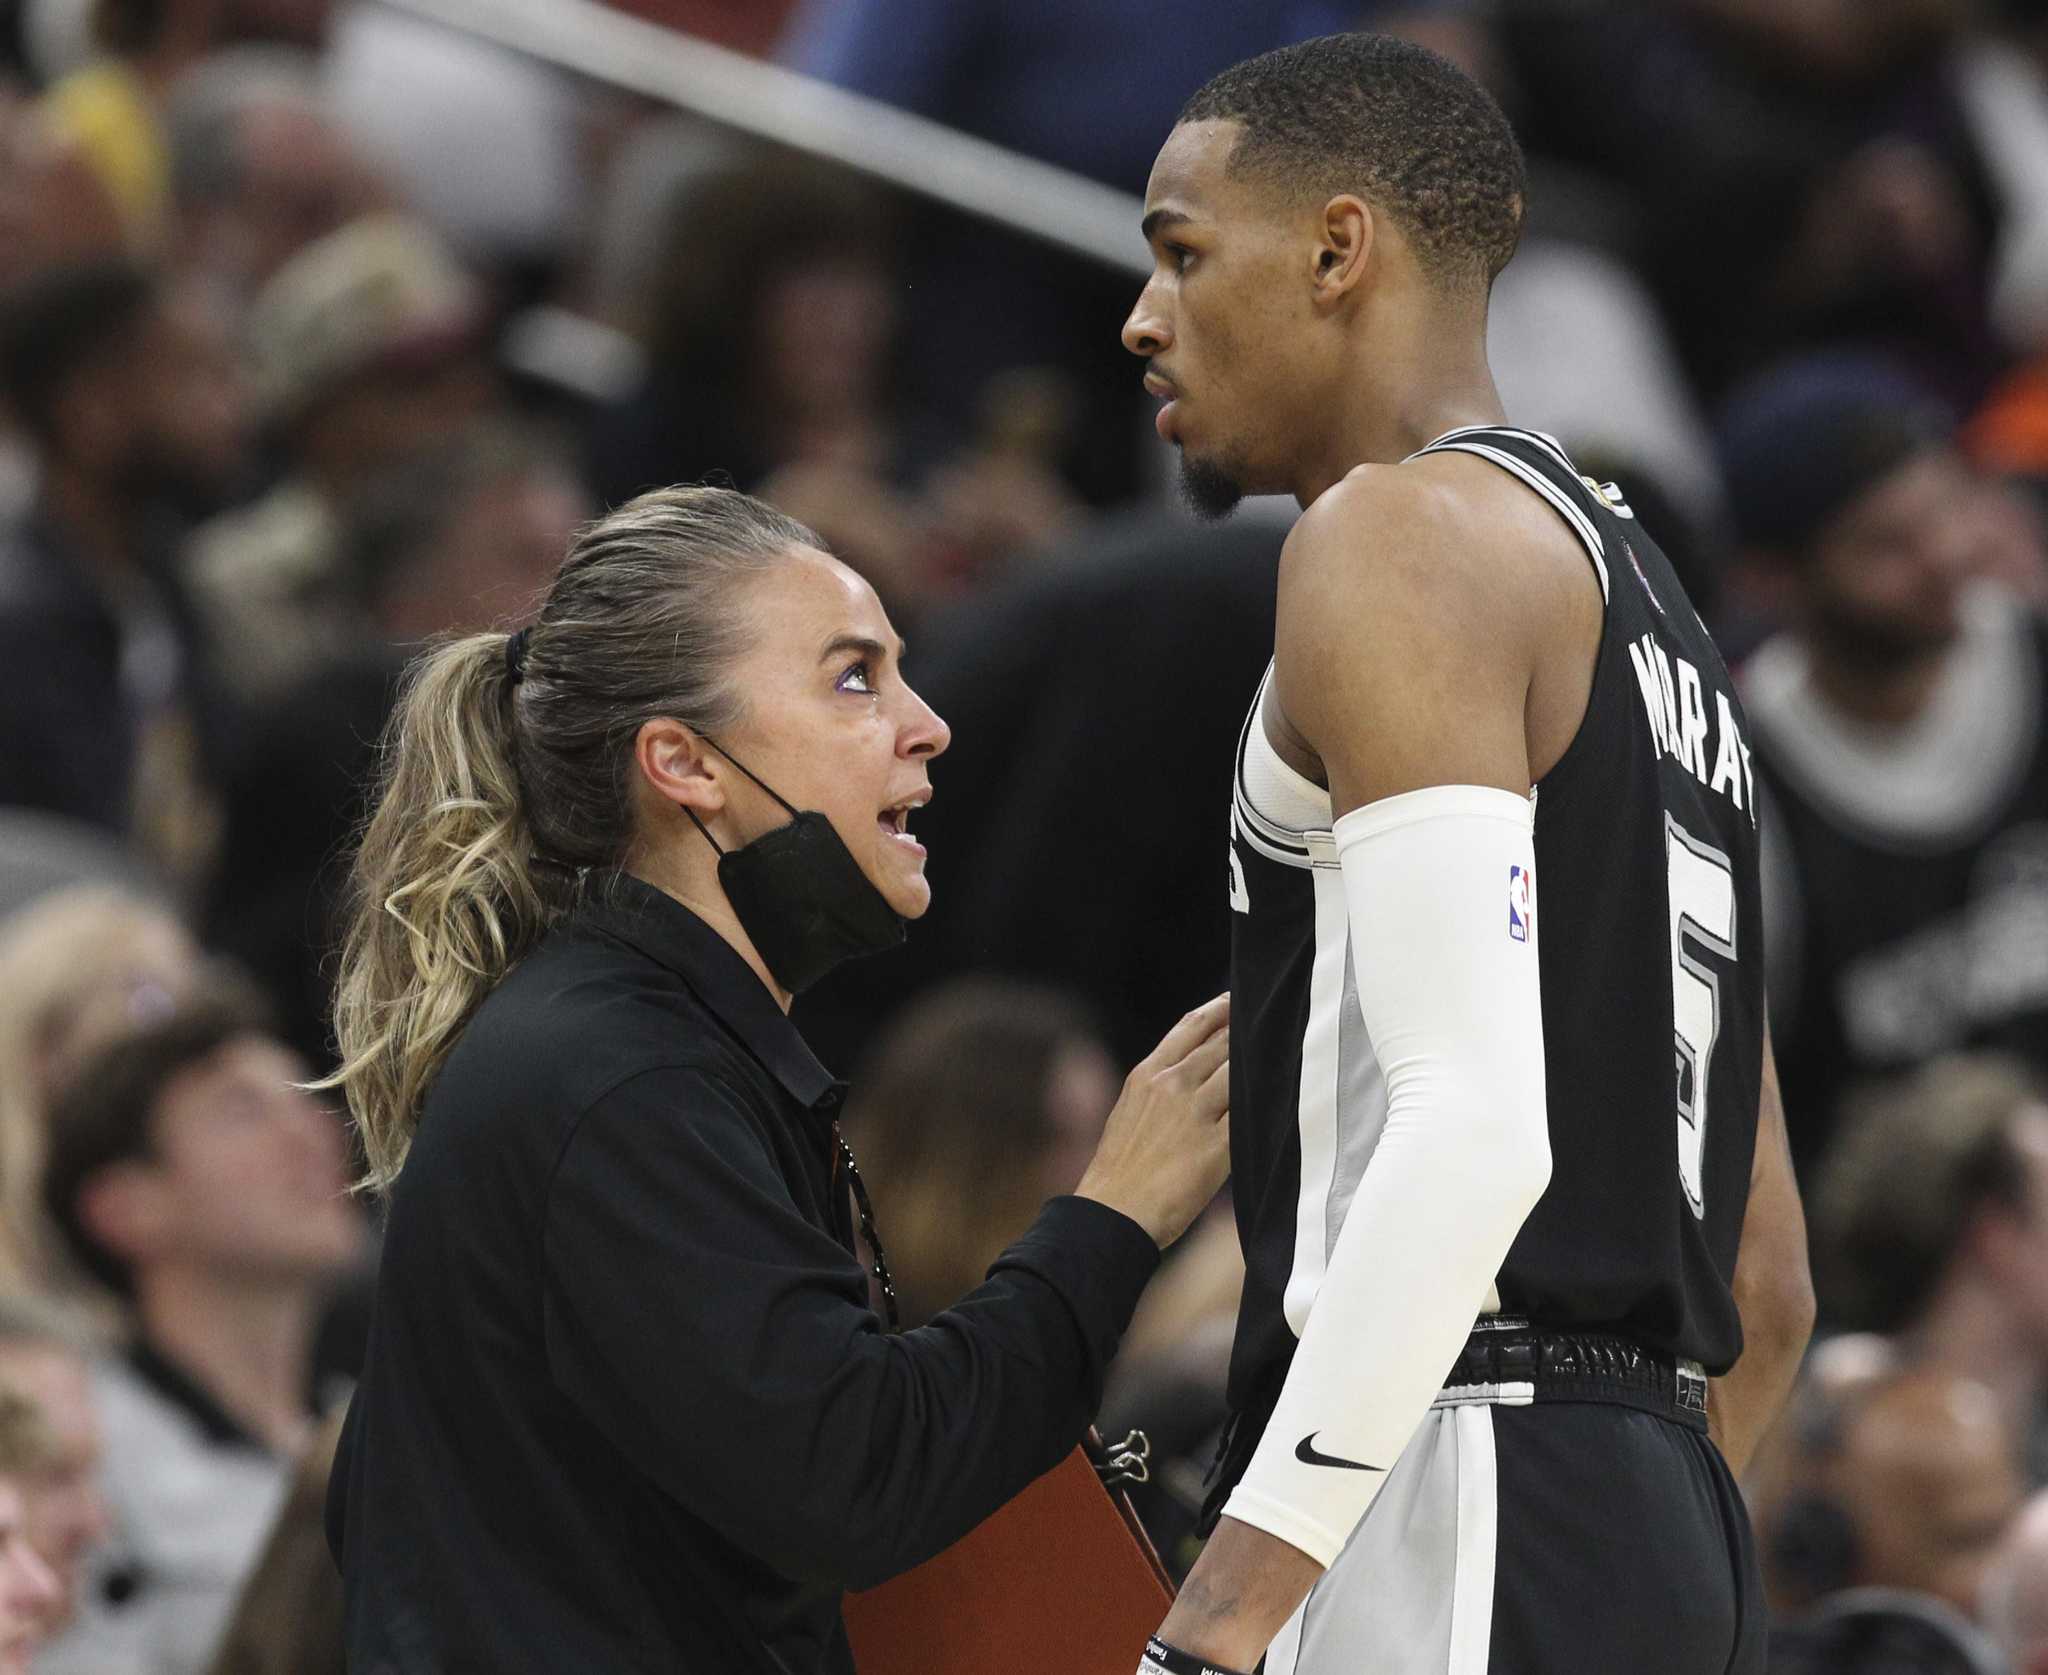 Everyone loves and respects her': Spurs have mixed reactions to Becky Hammon...